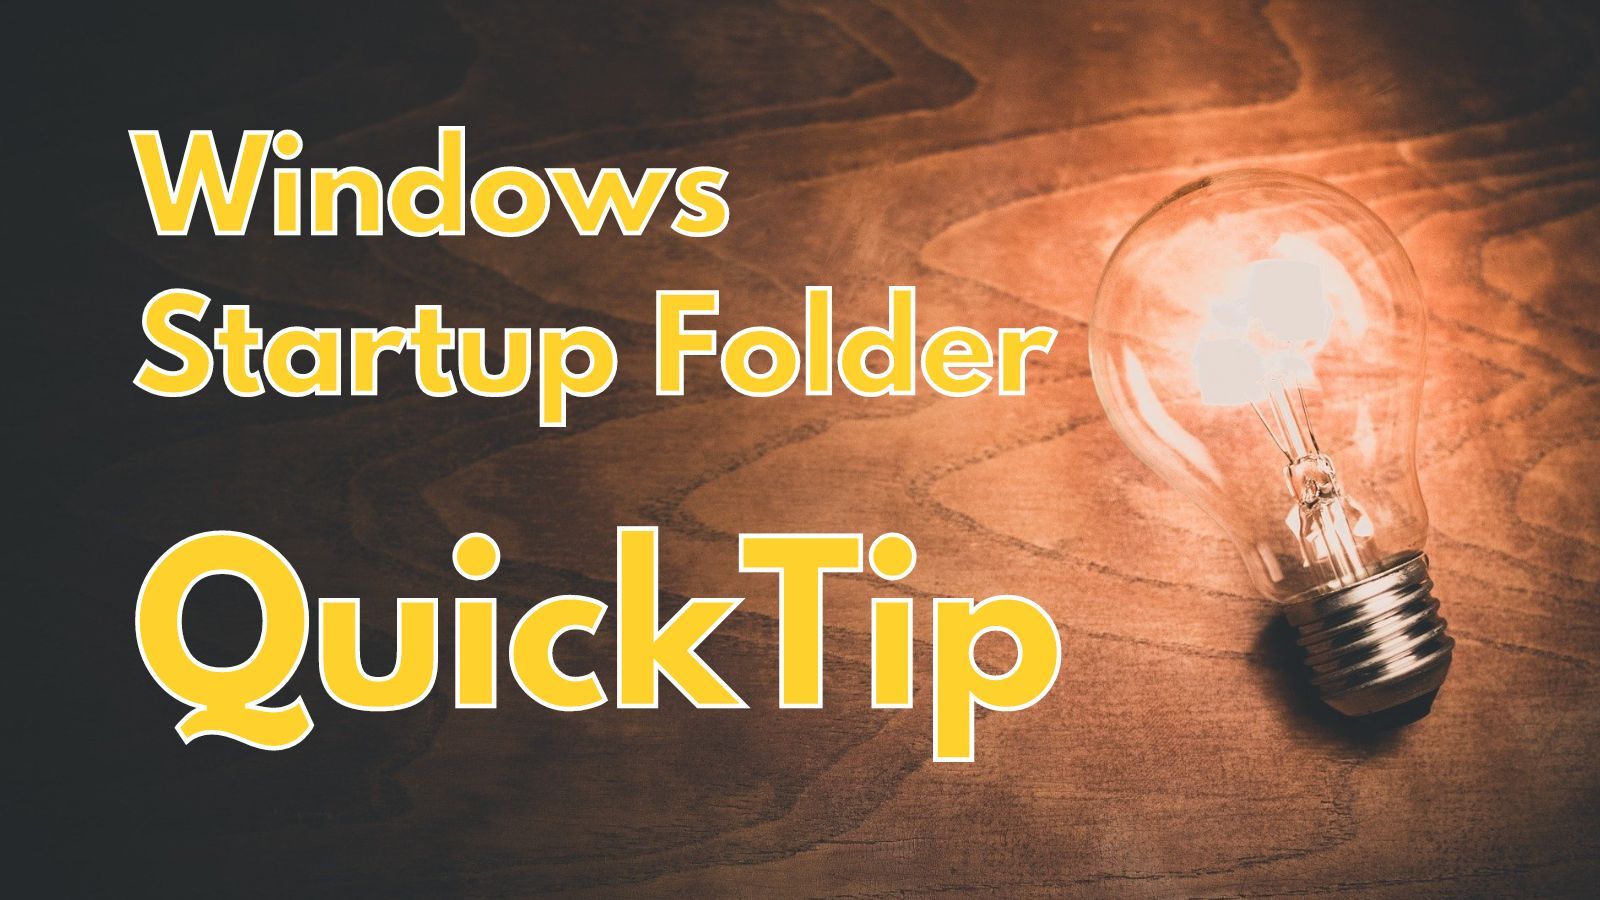 HOW TO: Access the Windows Startup Folder